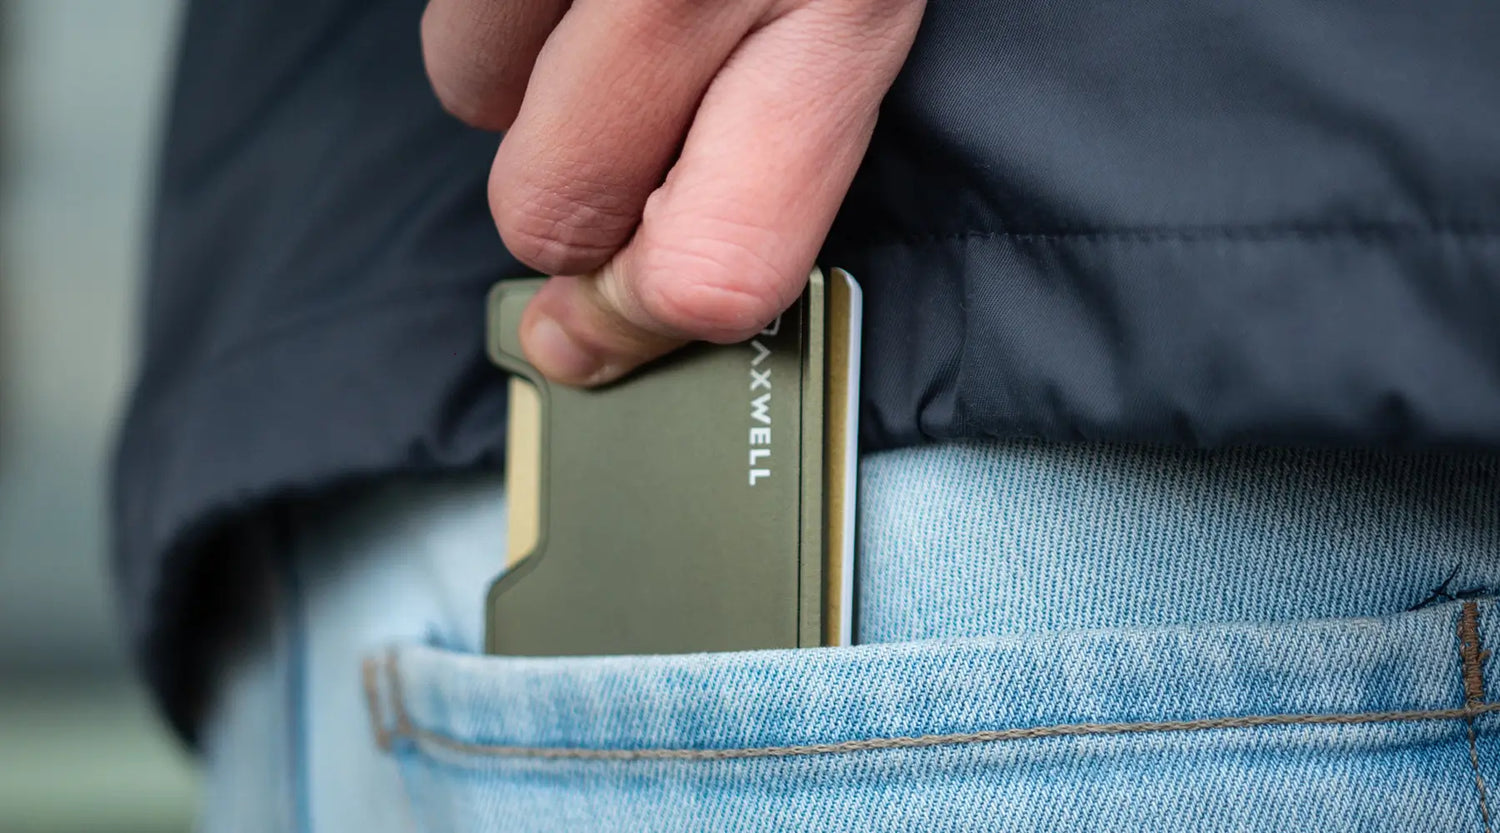 What Are RFID-Blocking Wallets & How Does RFID Work?